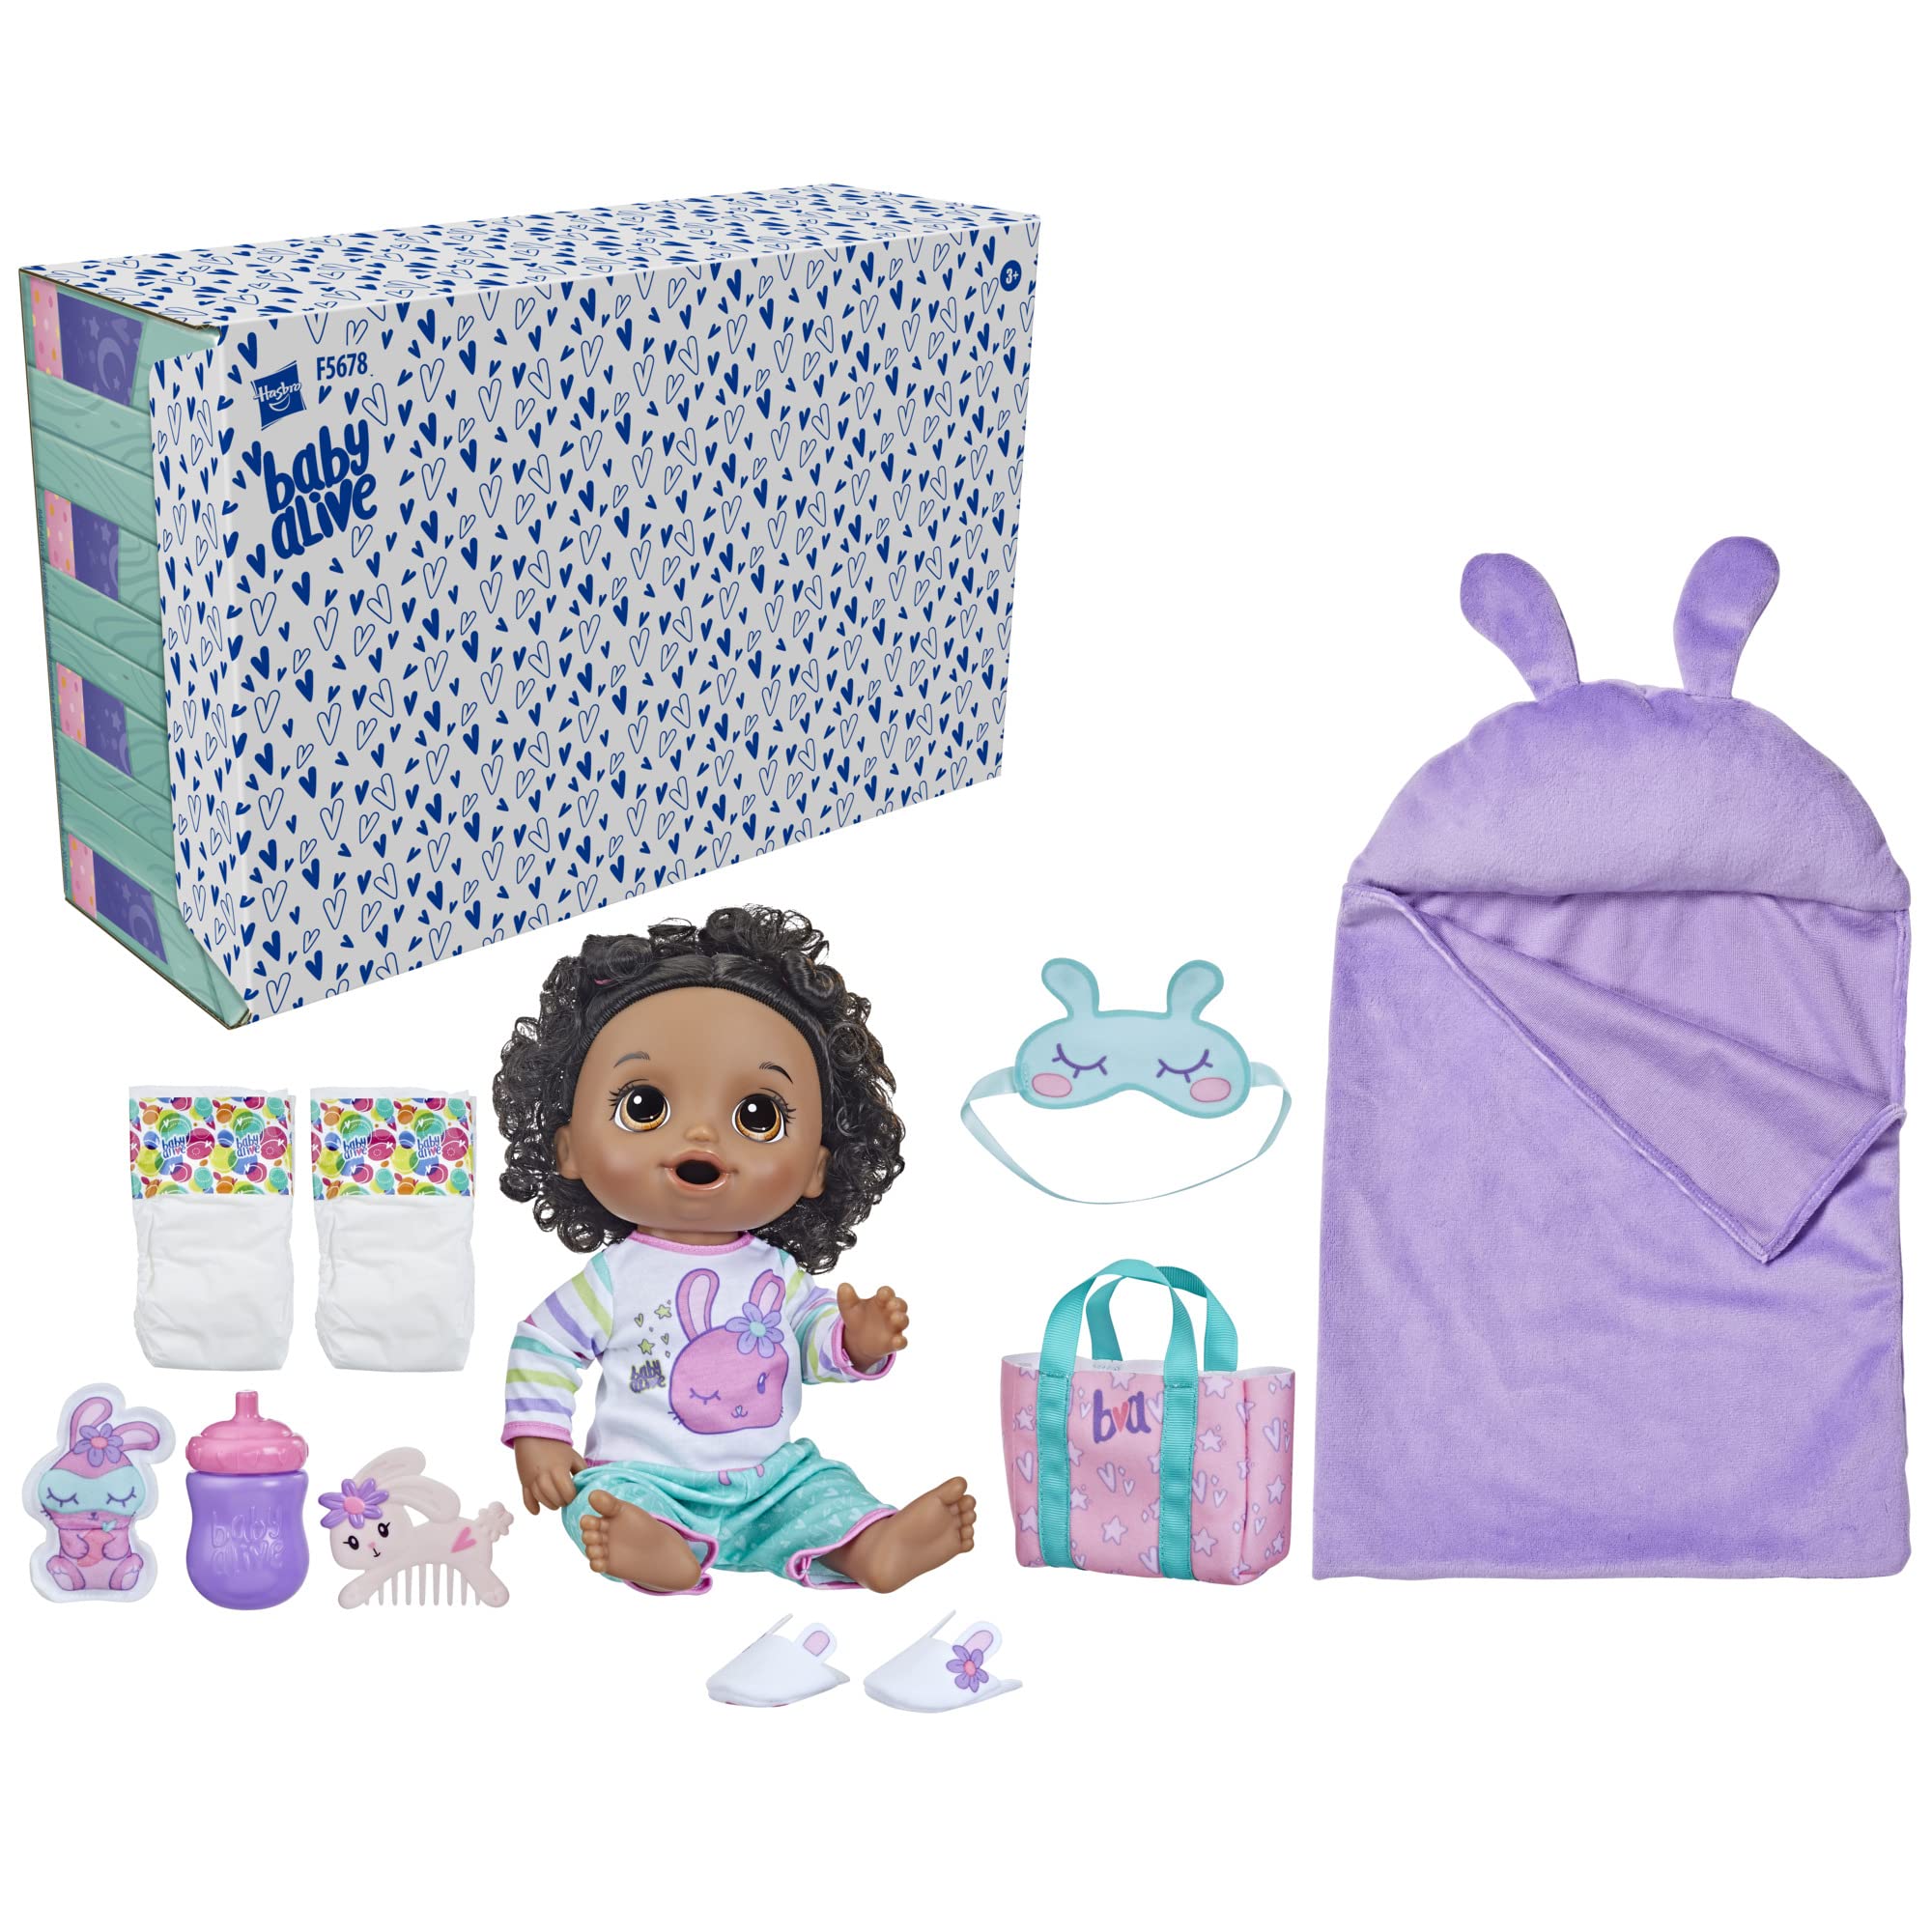 Baby Alive Bunny Sleepover Baby Doll, Bedtime-Themed 12-Inch Dolls, Sleeping Bag & Bunny-Themed Doll Accessories, Toys for 3 Year Old Girls and Boys and Up, Black Hair (Amazon Exclusive)